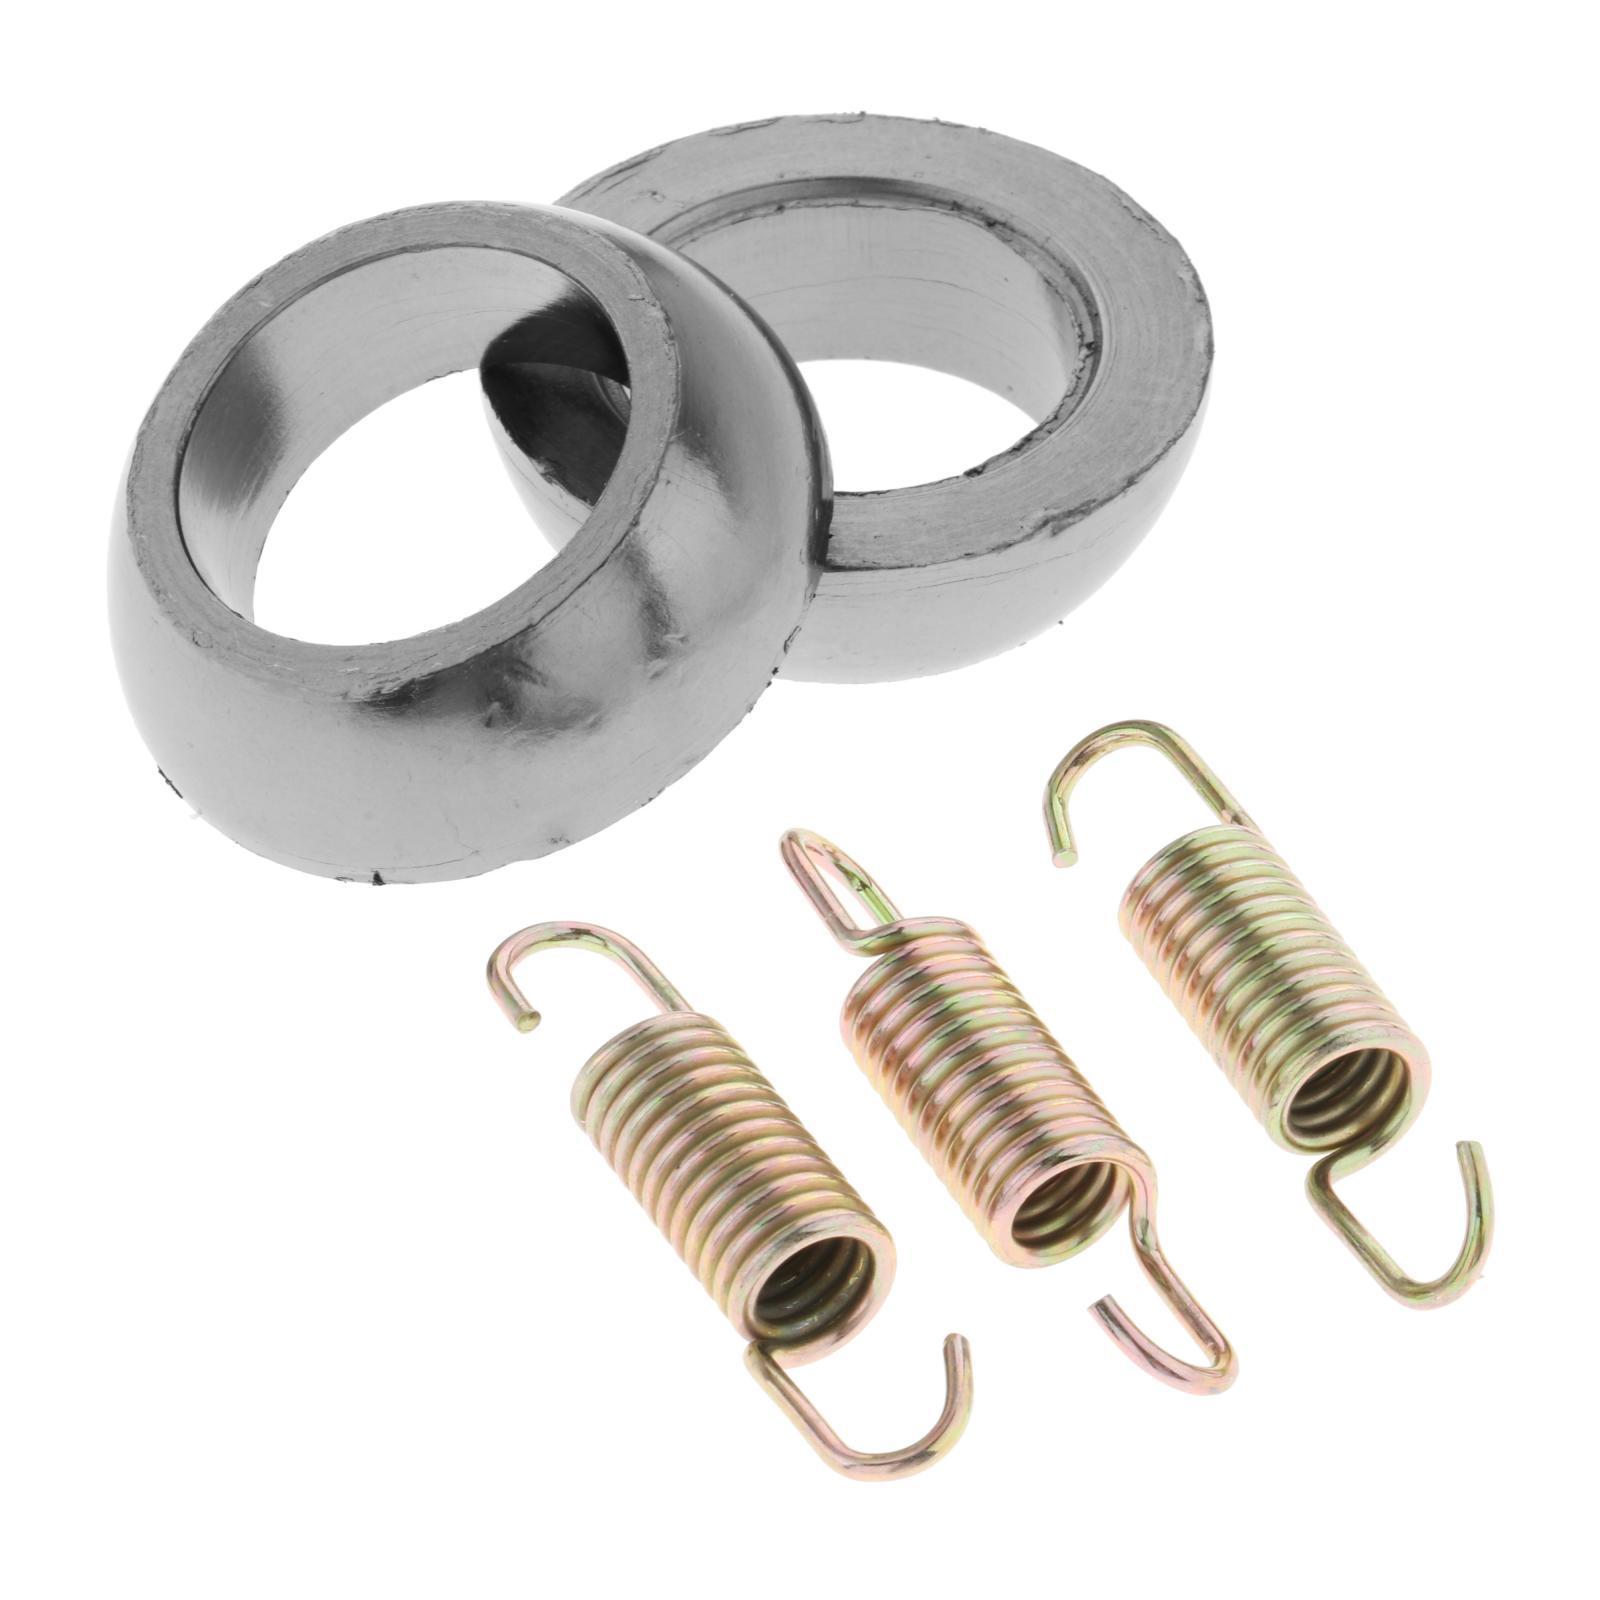 Exhaust Gasket & Spring Kit Replace for Arctic Cat 300 250 2x4 4x4